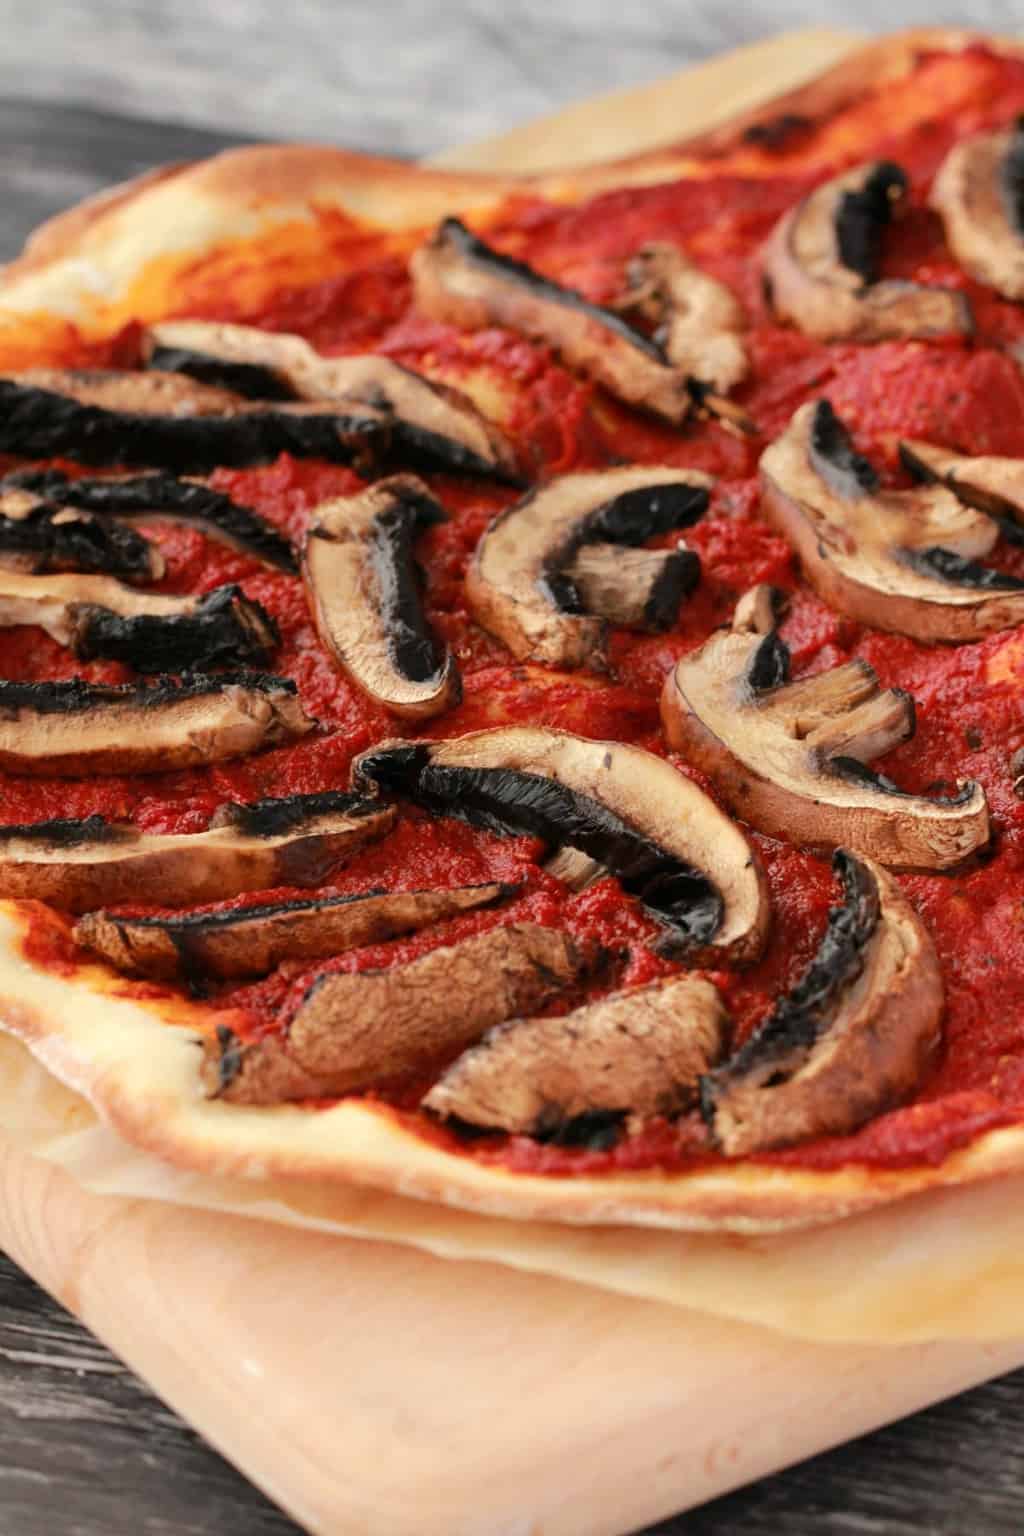 Just cooked pizza base with tomato sauce and black mushrooms on a wooden board